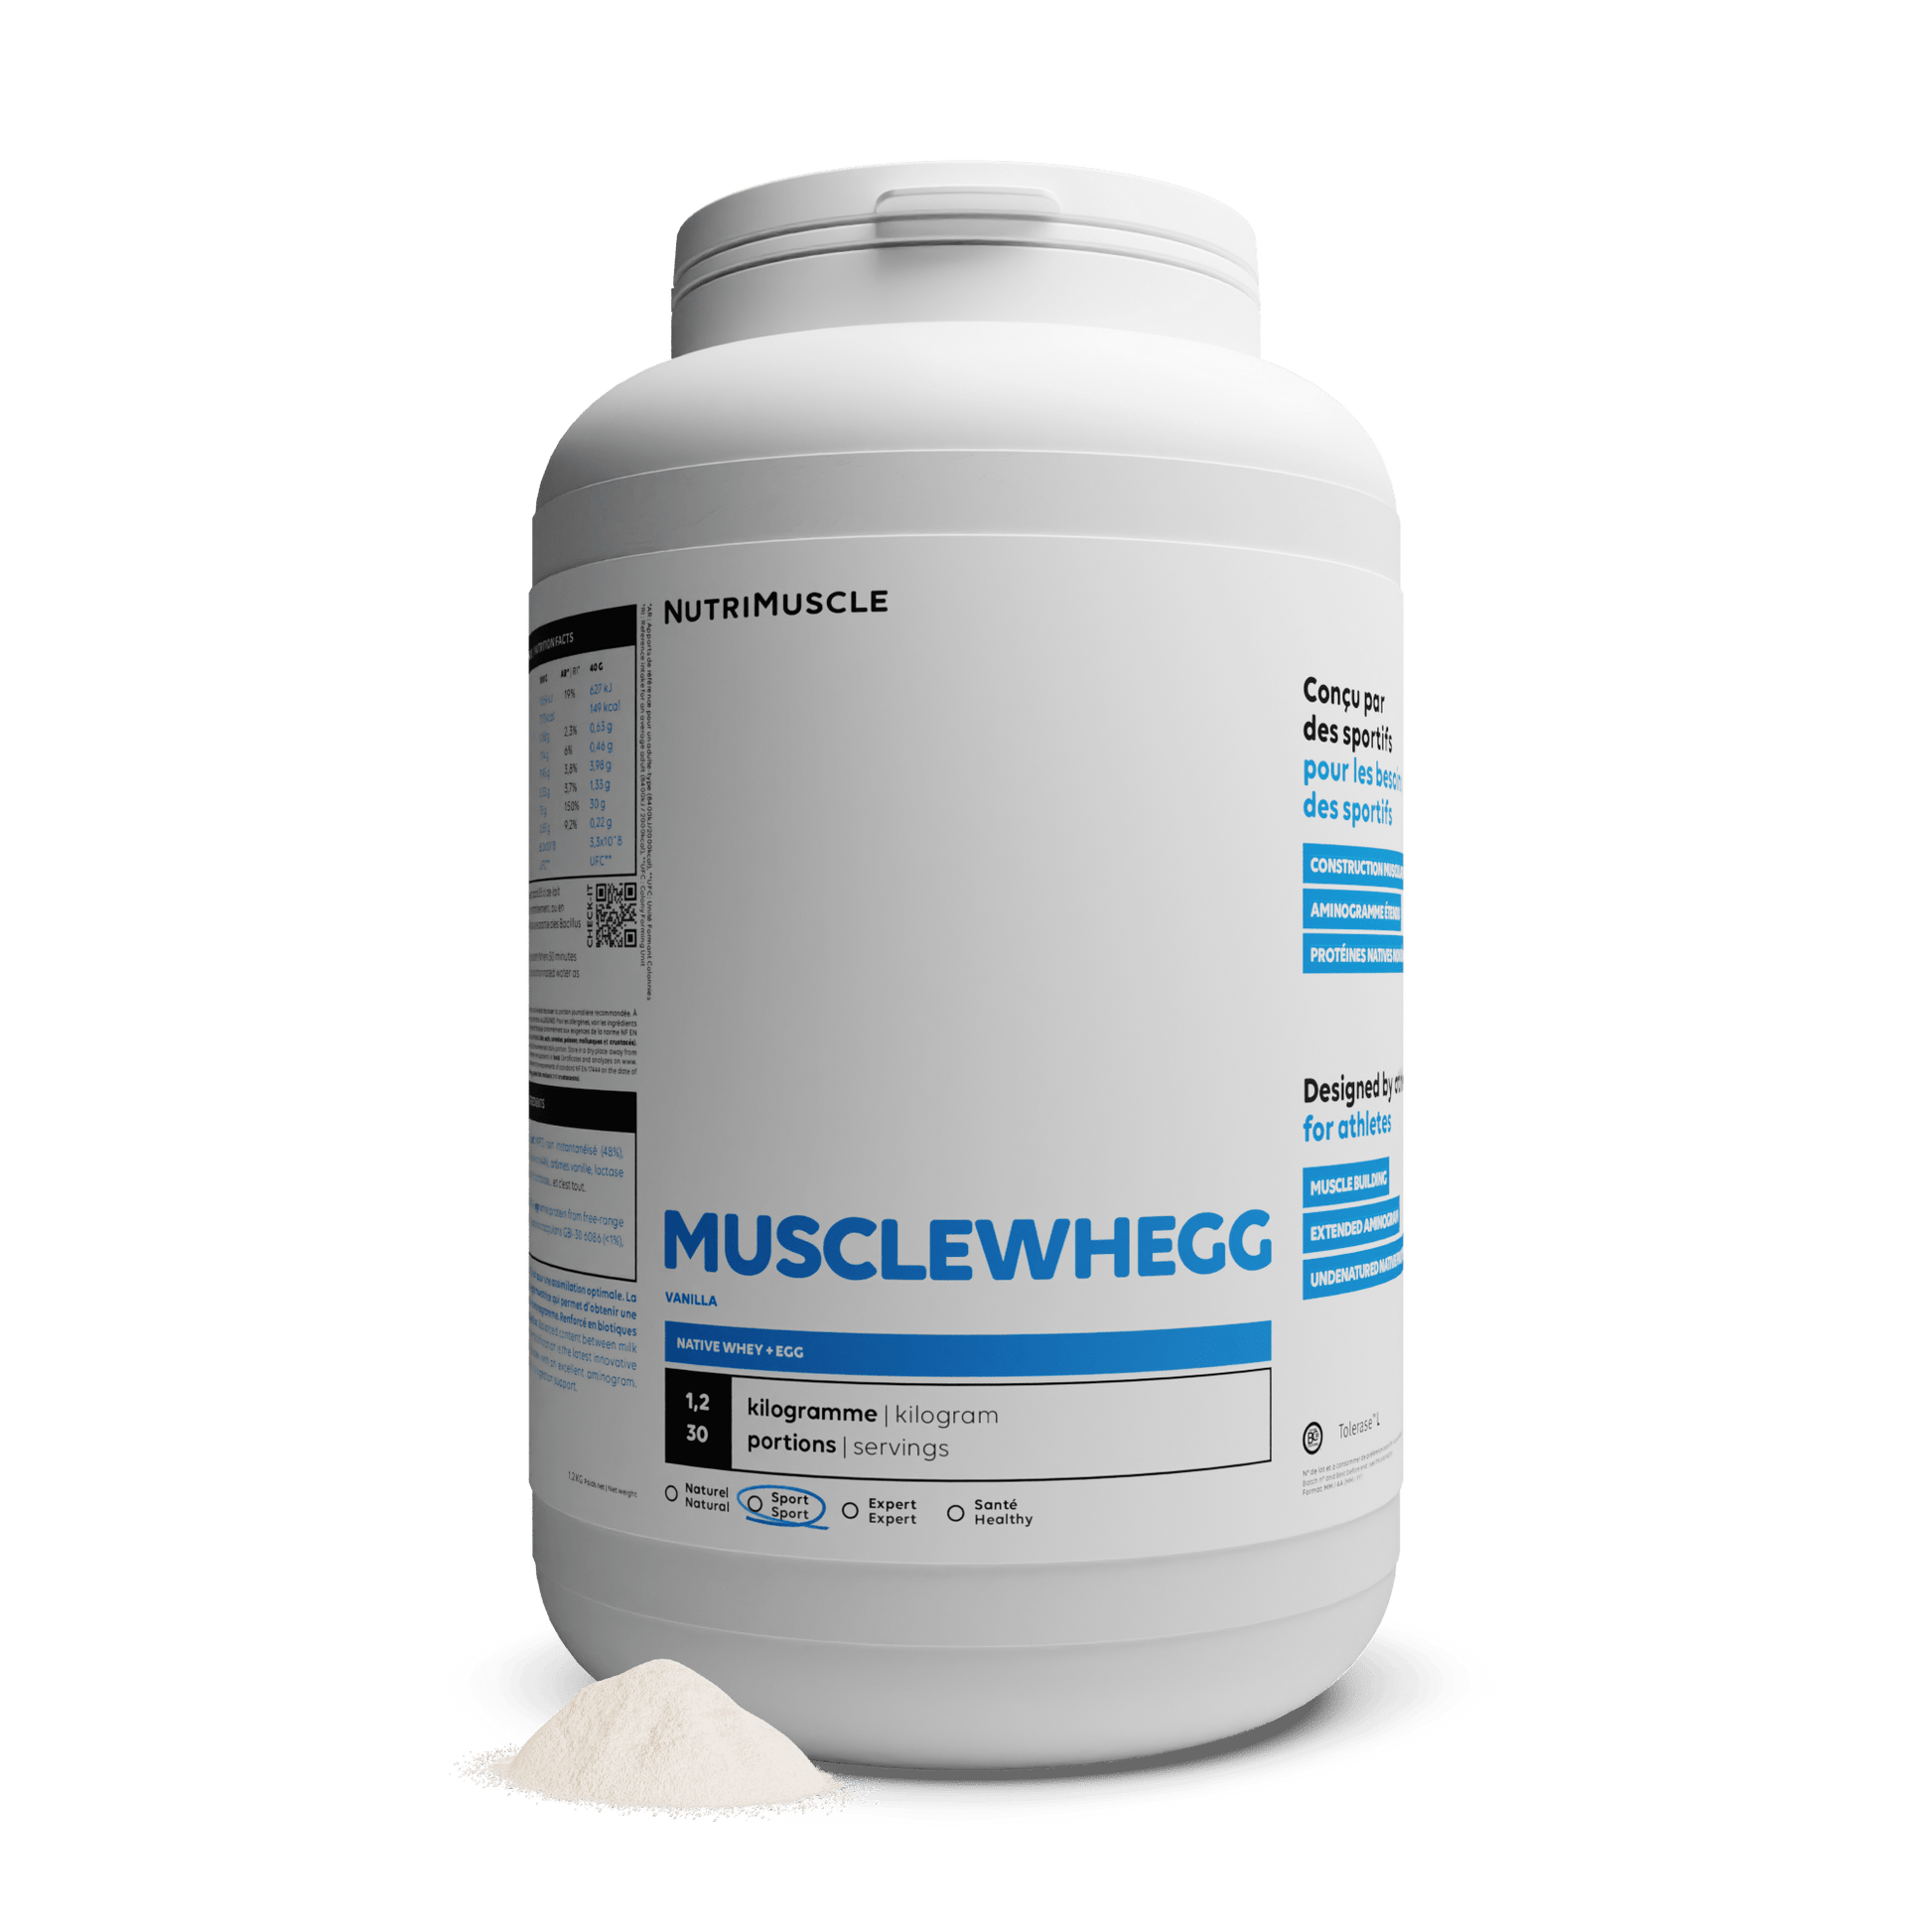 Nutrimuscle Protéines Vanille / 1.20 kg Musclewhegg - Mix Protein